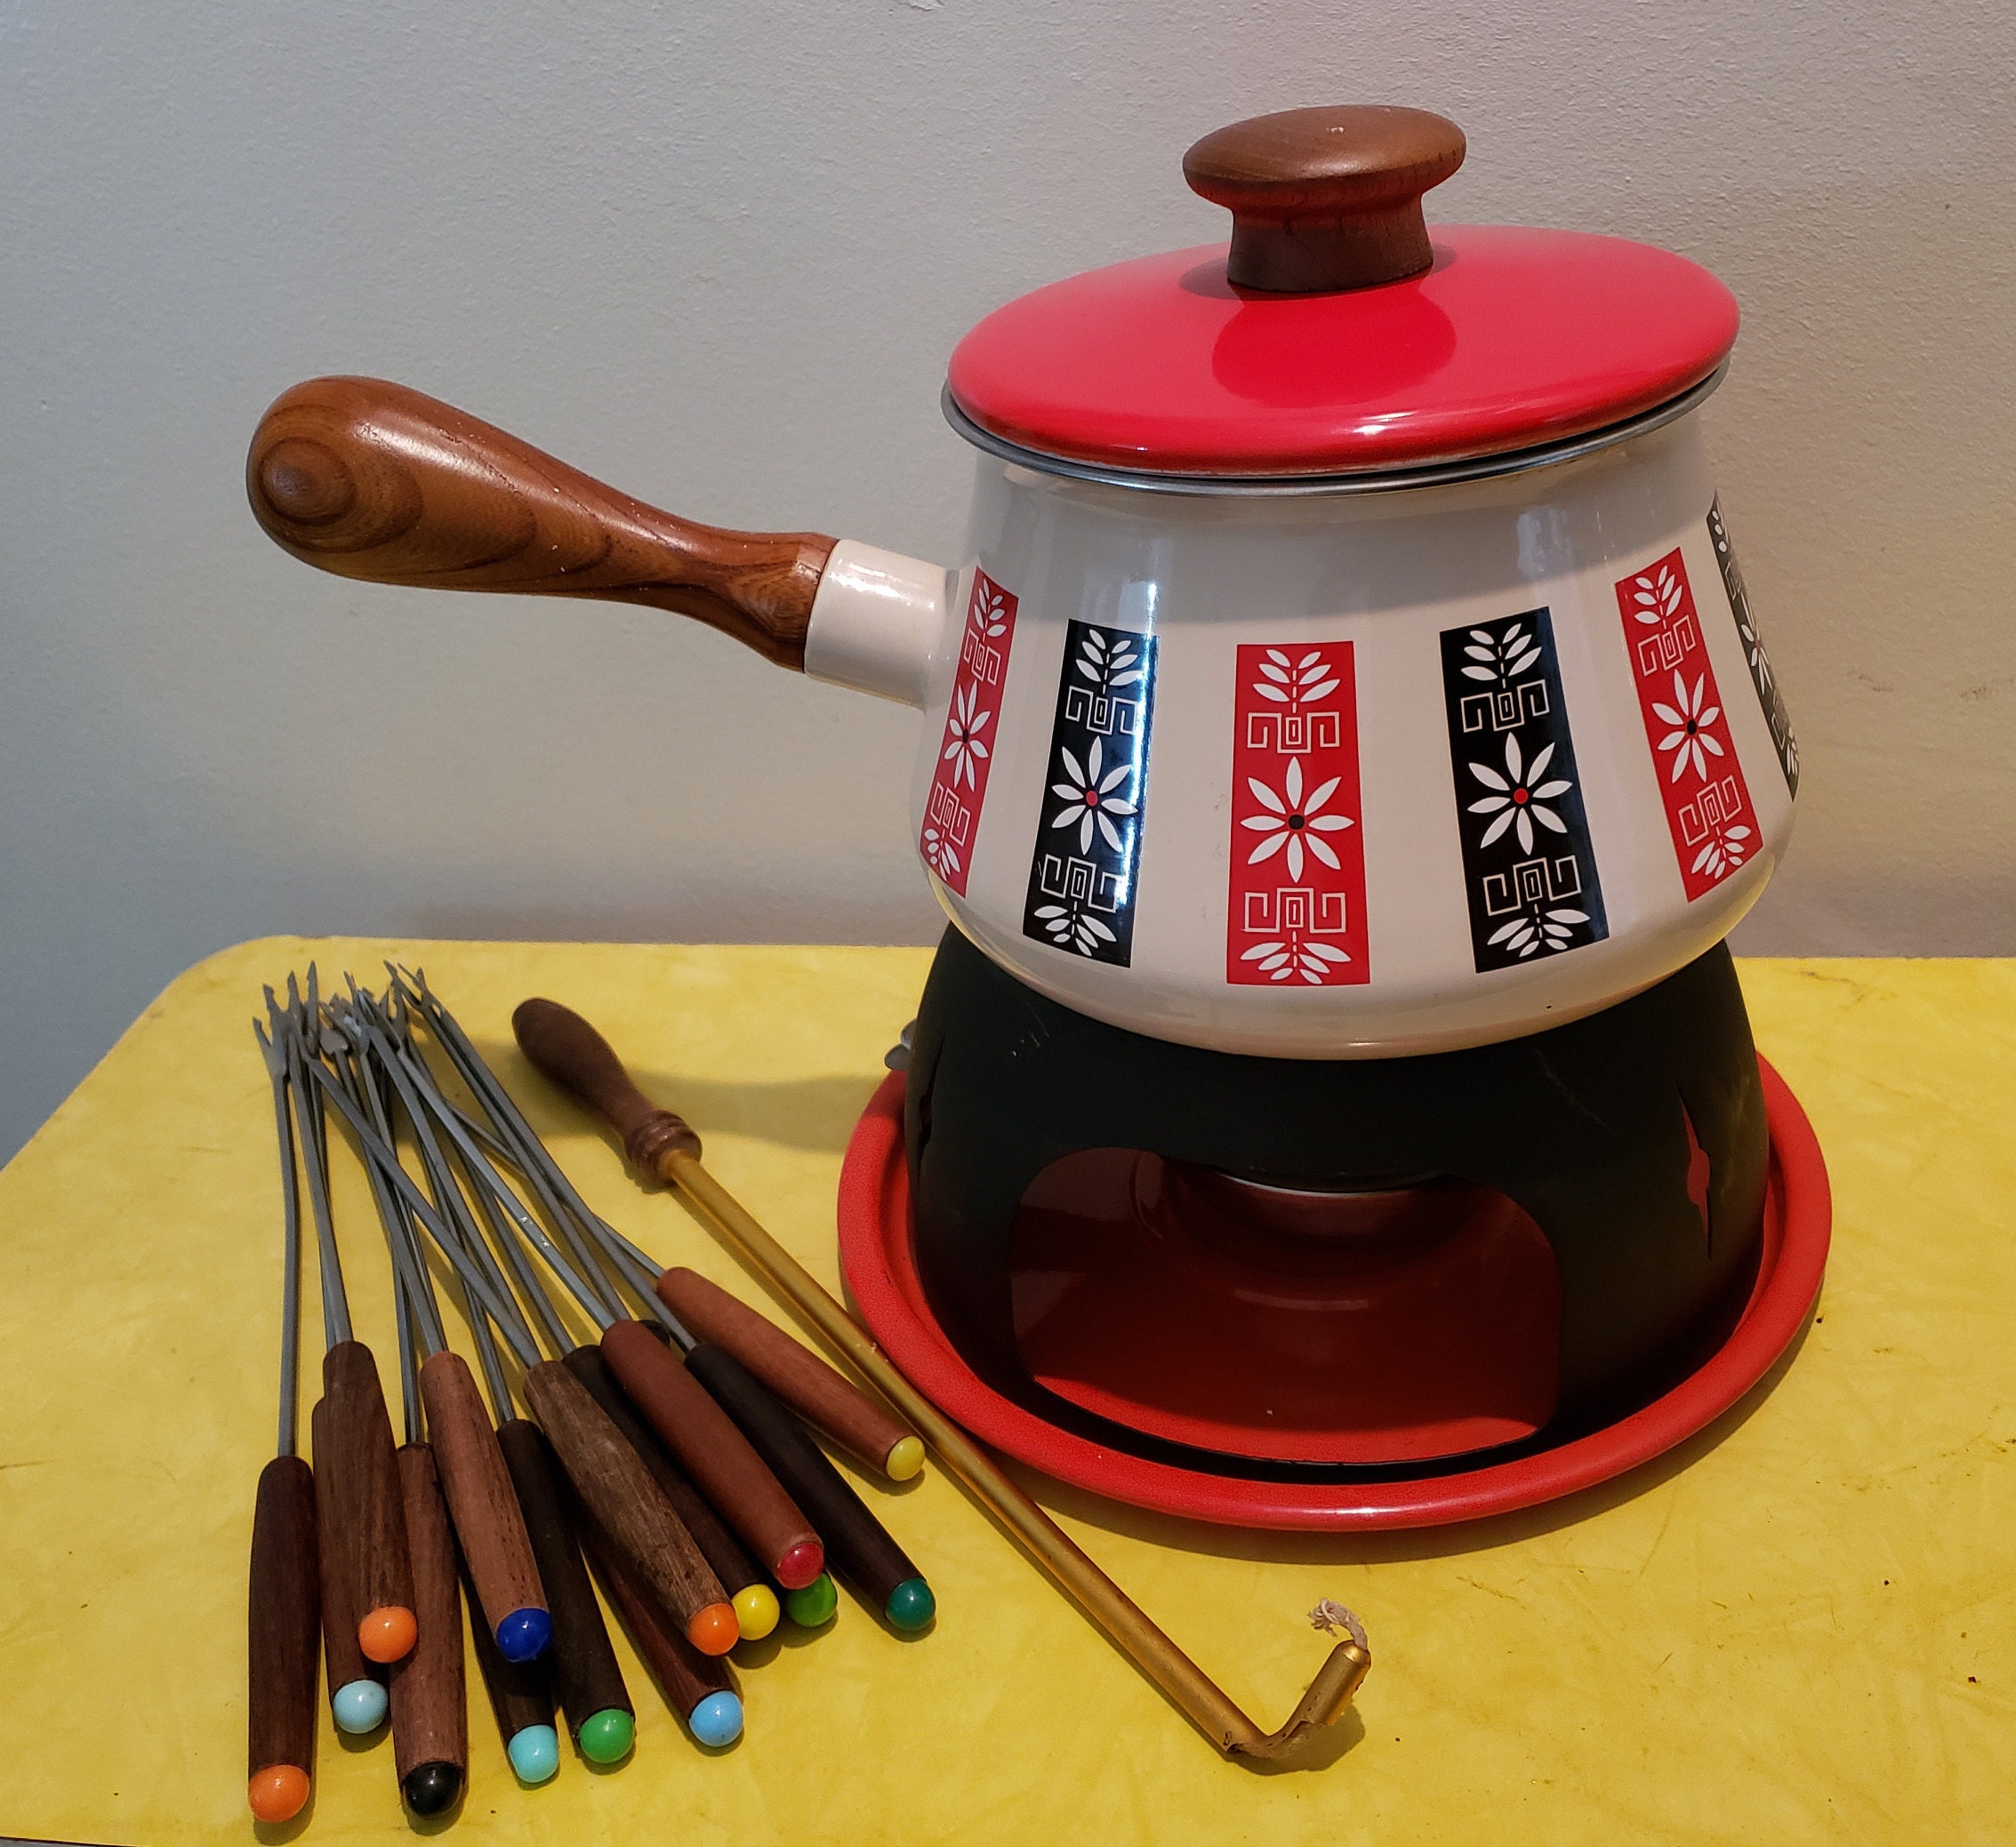 Oster Fondue Pot with Forks, Red – Giant Tiger